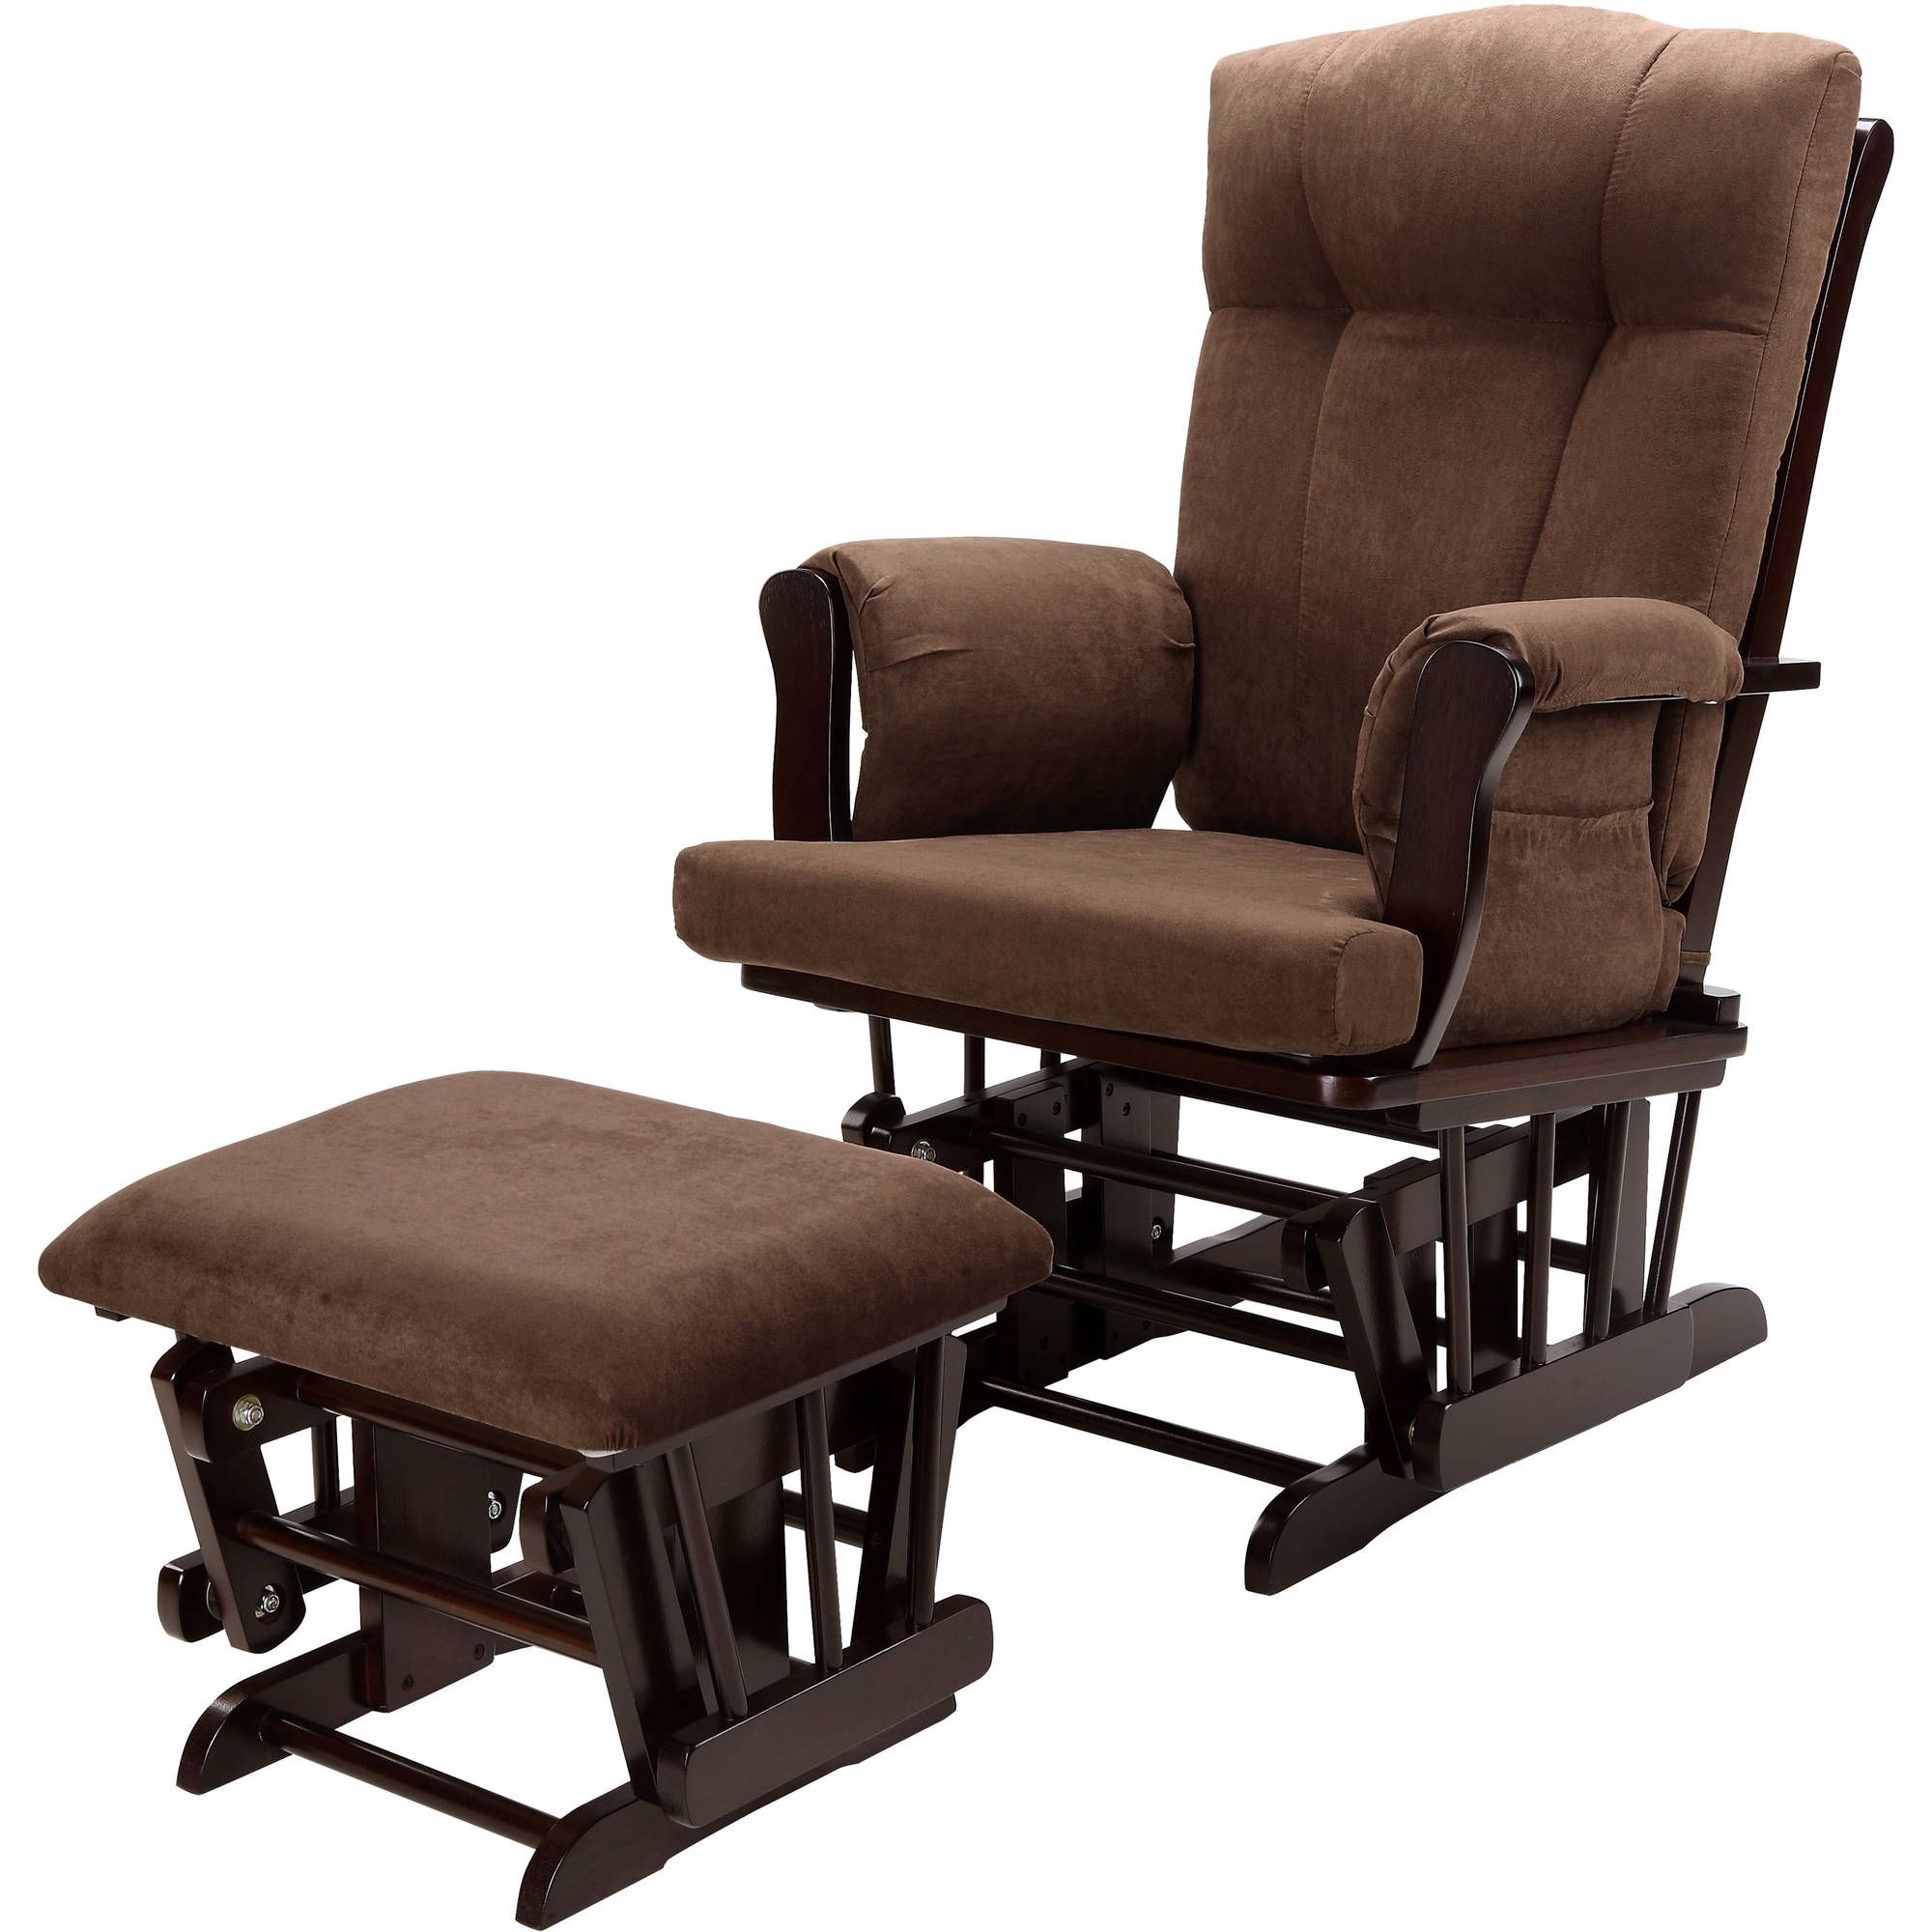 Popular Patio Rocking Chairs With Ottoman Intended For Baby Relax Glider Rocker And Ottoman Espresso With Chocolate (View 5 of 20)